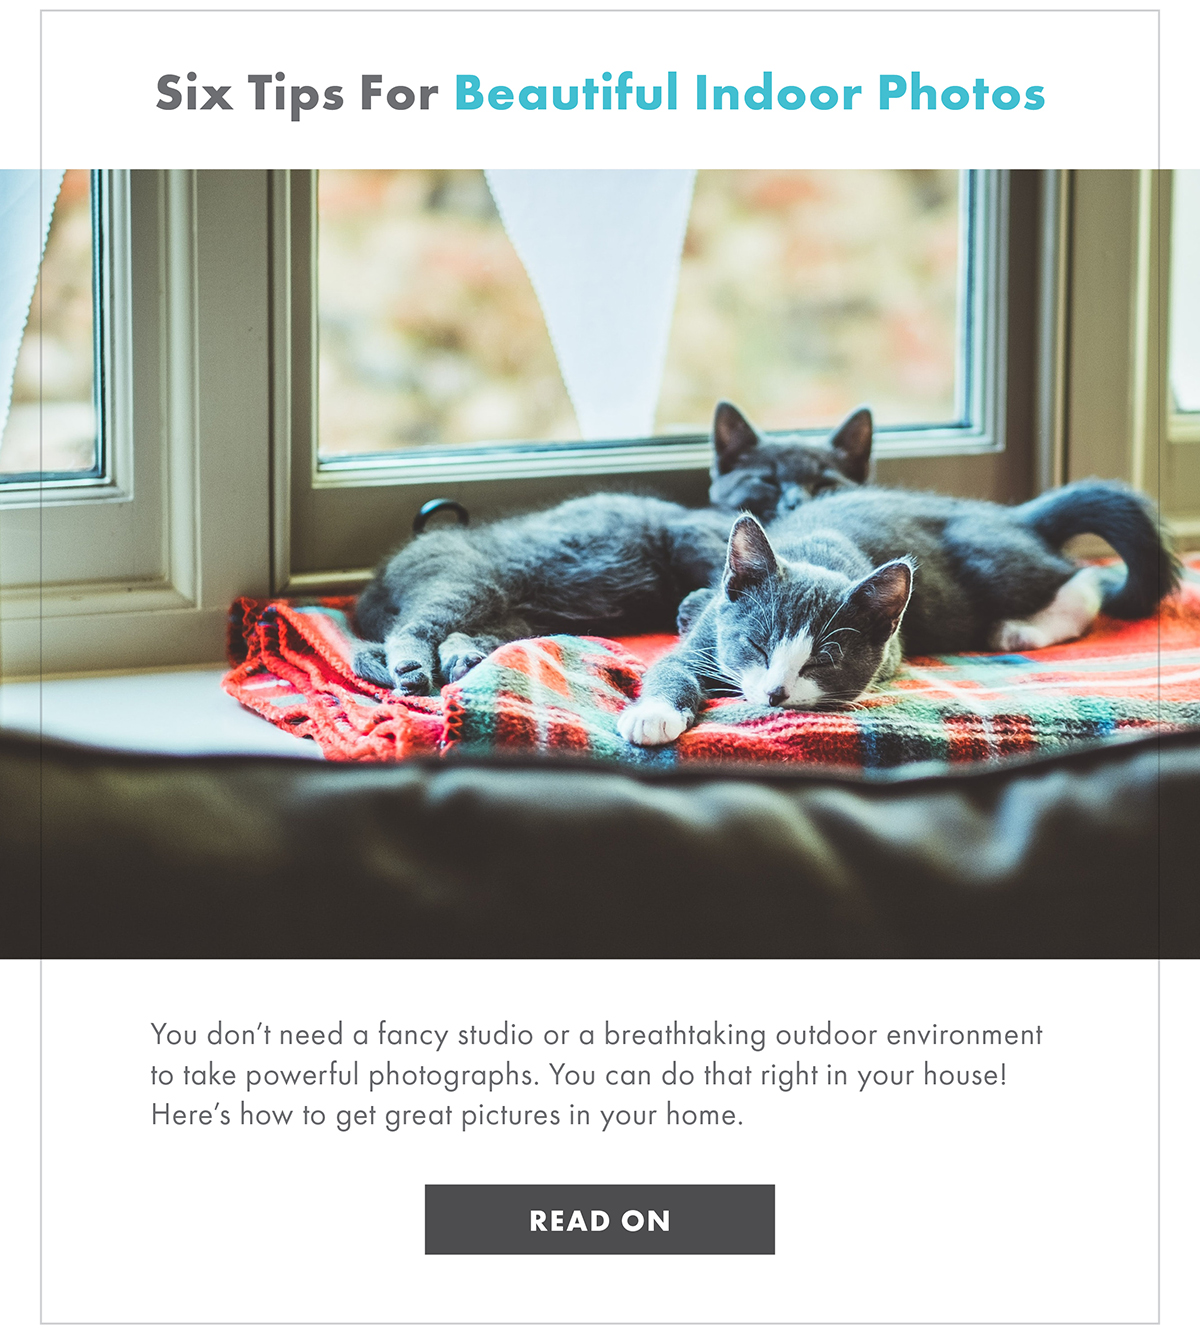 SIX TIPS FOR BEAUTIFUL INDOOR PHOTOS  You don't need a fancy studio or a breathtaking outdoor environment to take powerful photographs. You can do that right in your house! Here's how to get great pictures in your home.  READ ON